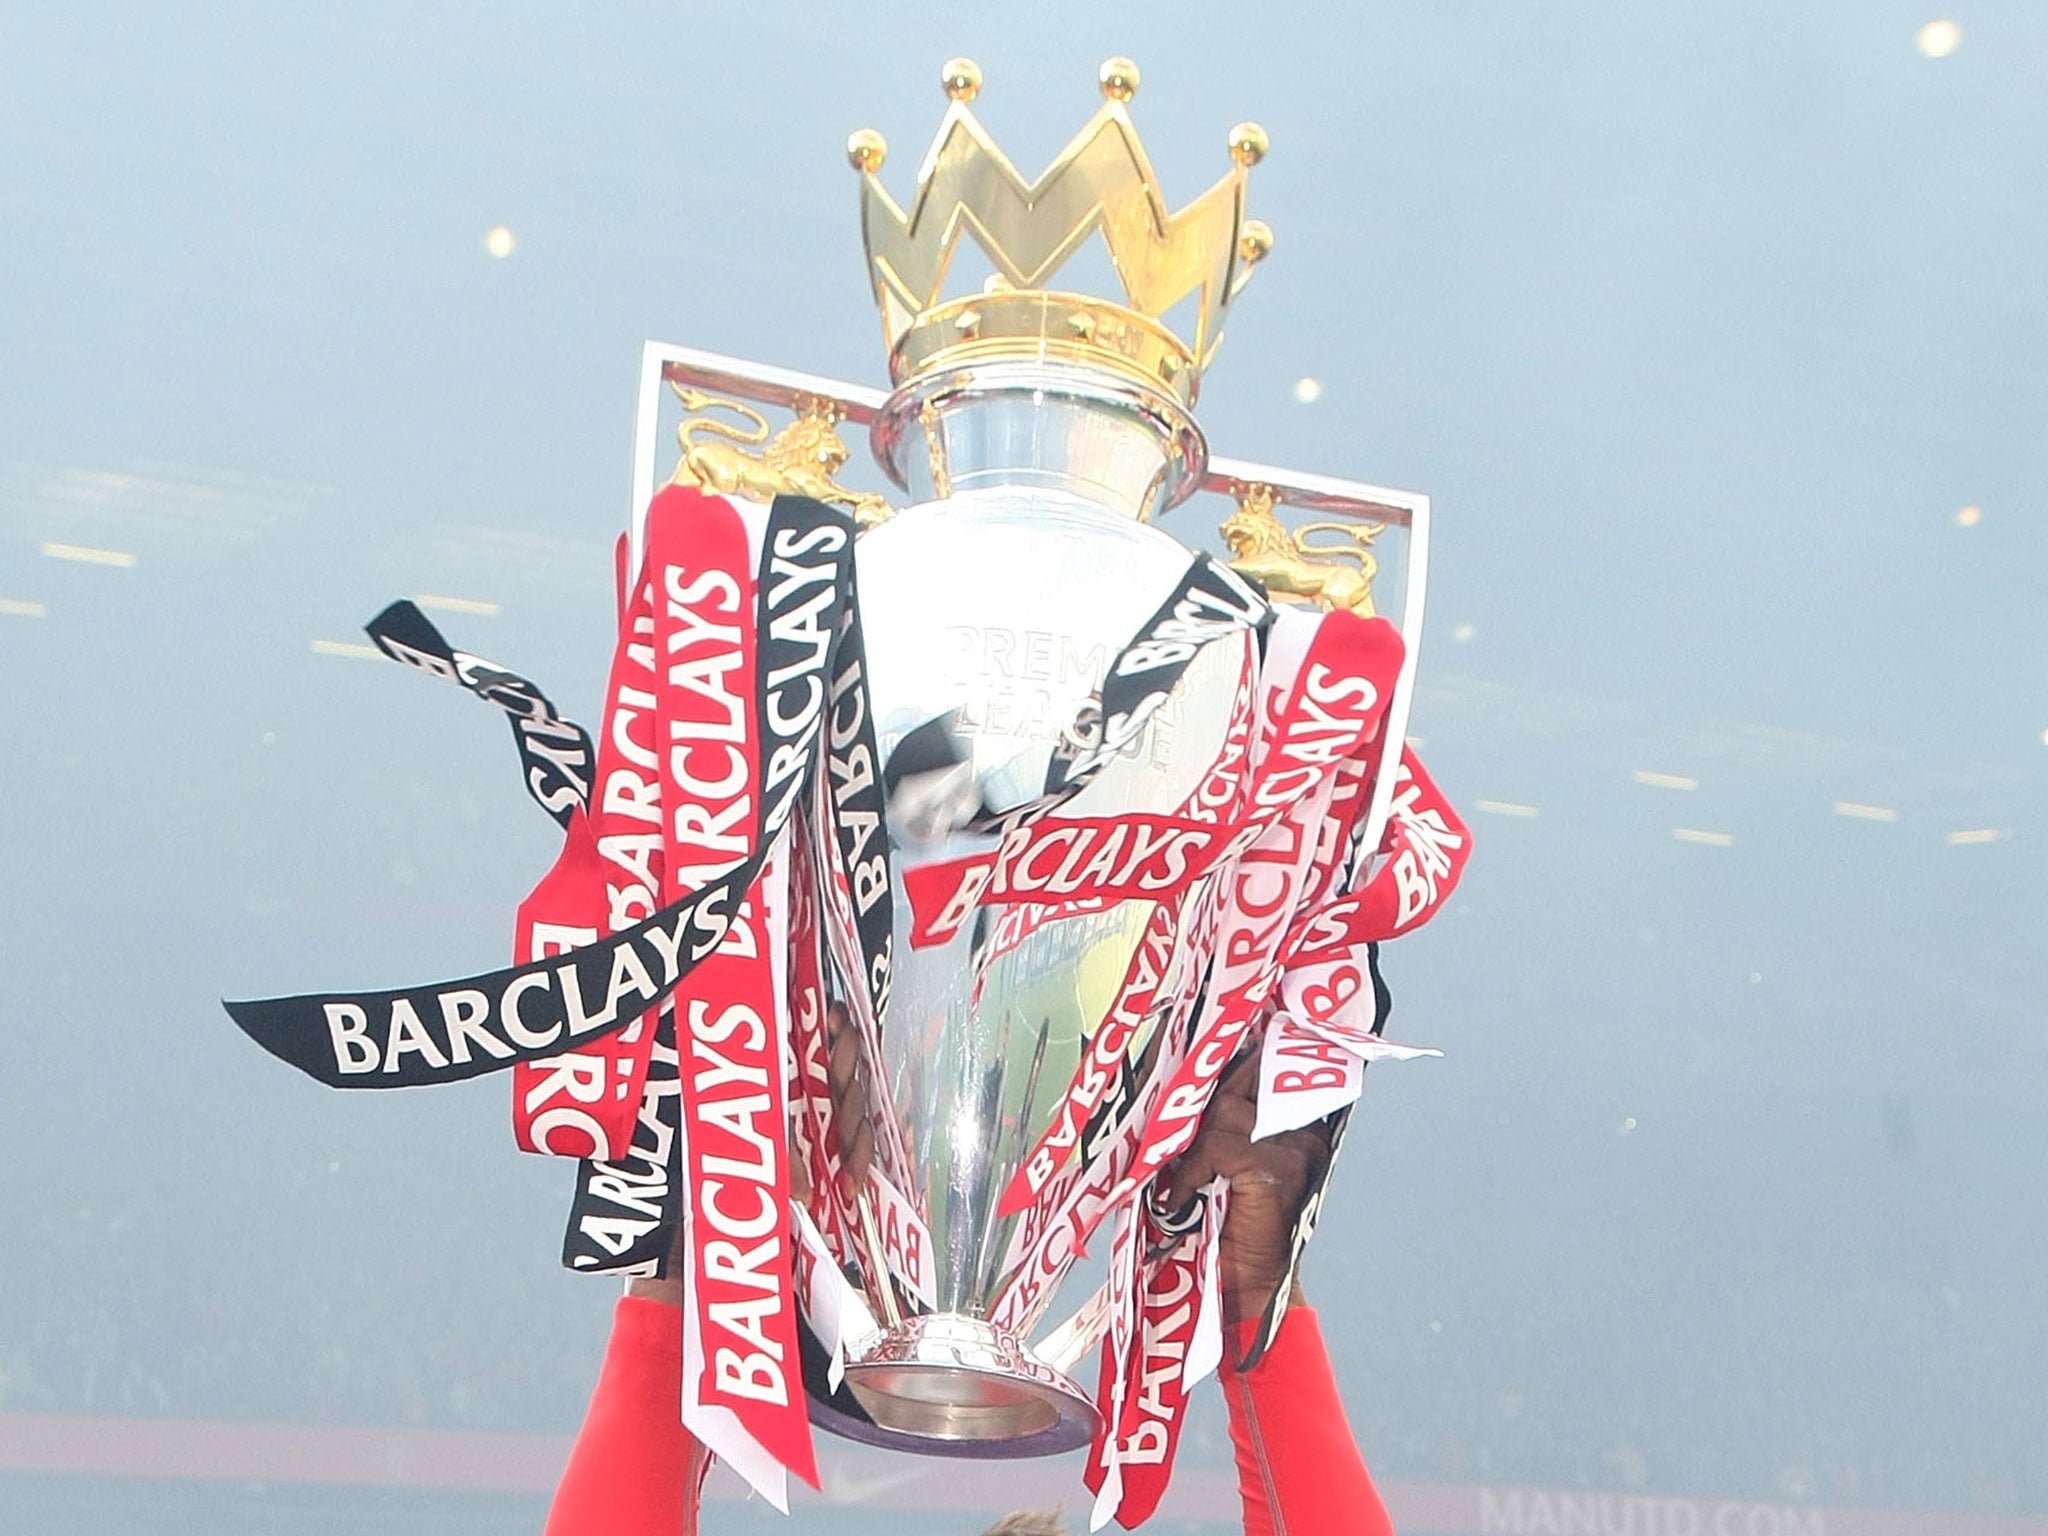 A view of the Premier League trophy at Old Trafford